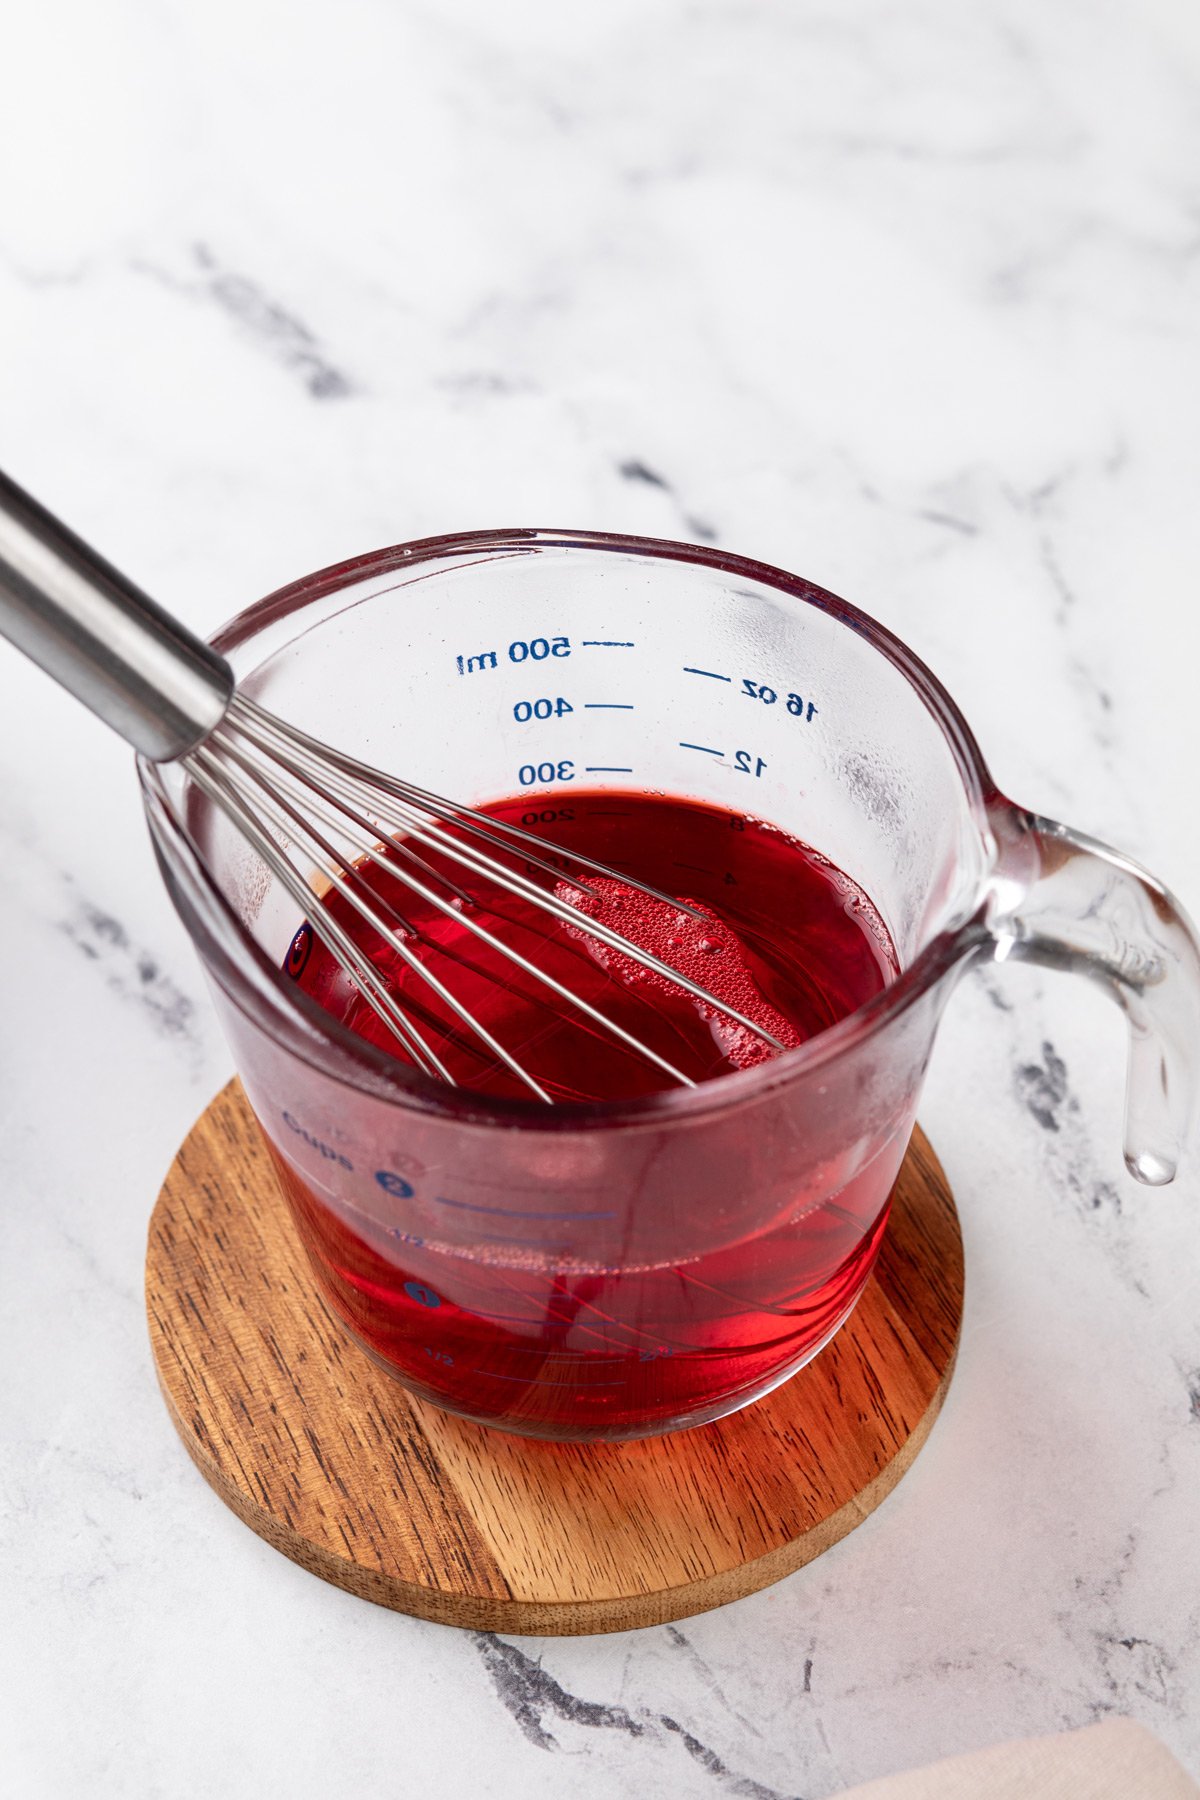 Strawberry jello mixture being whisked in a glass measuring cup.